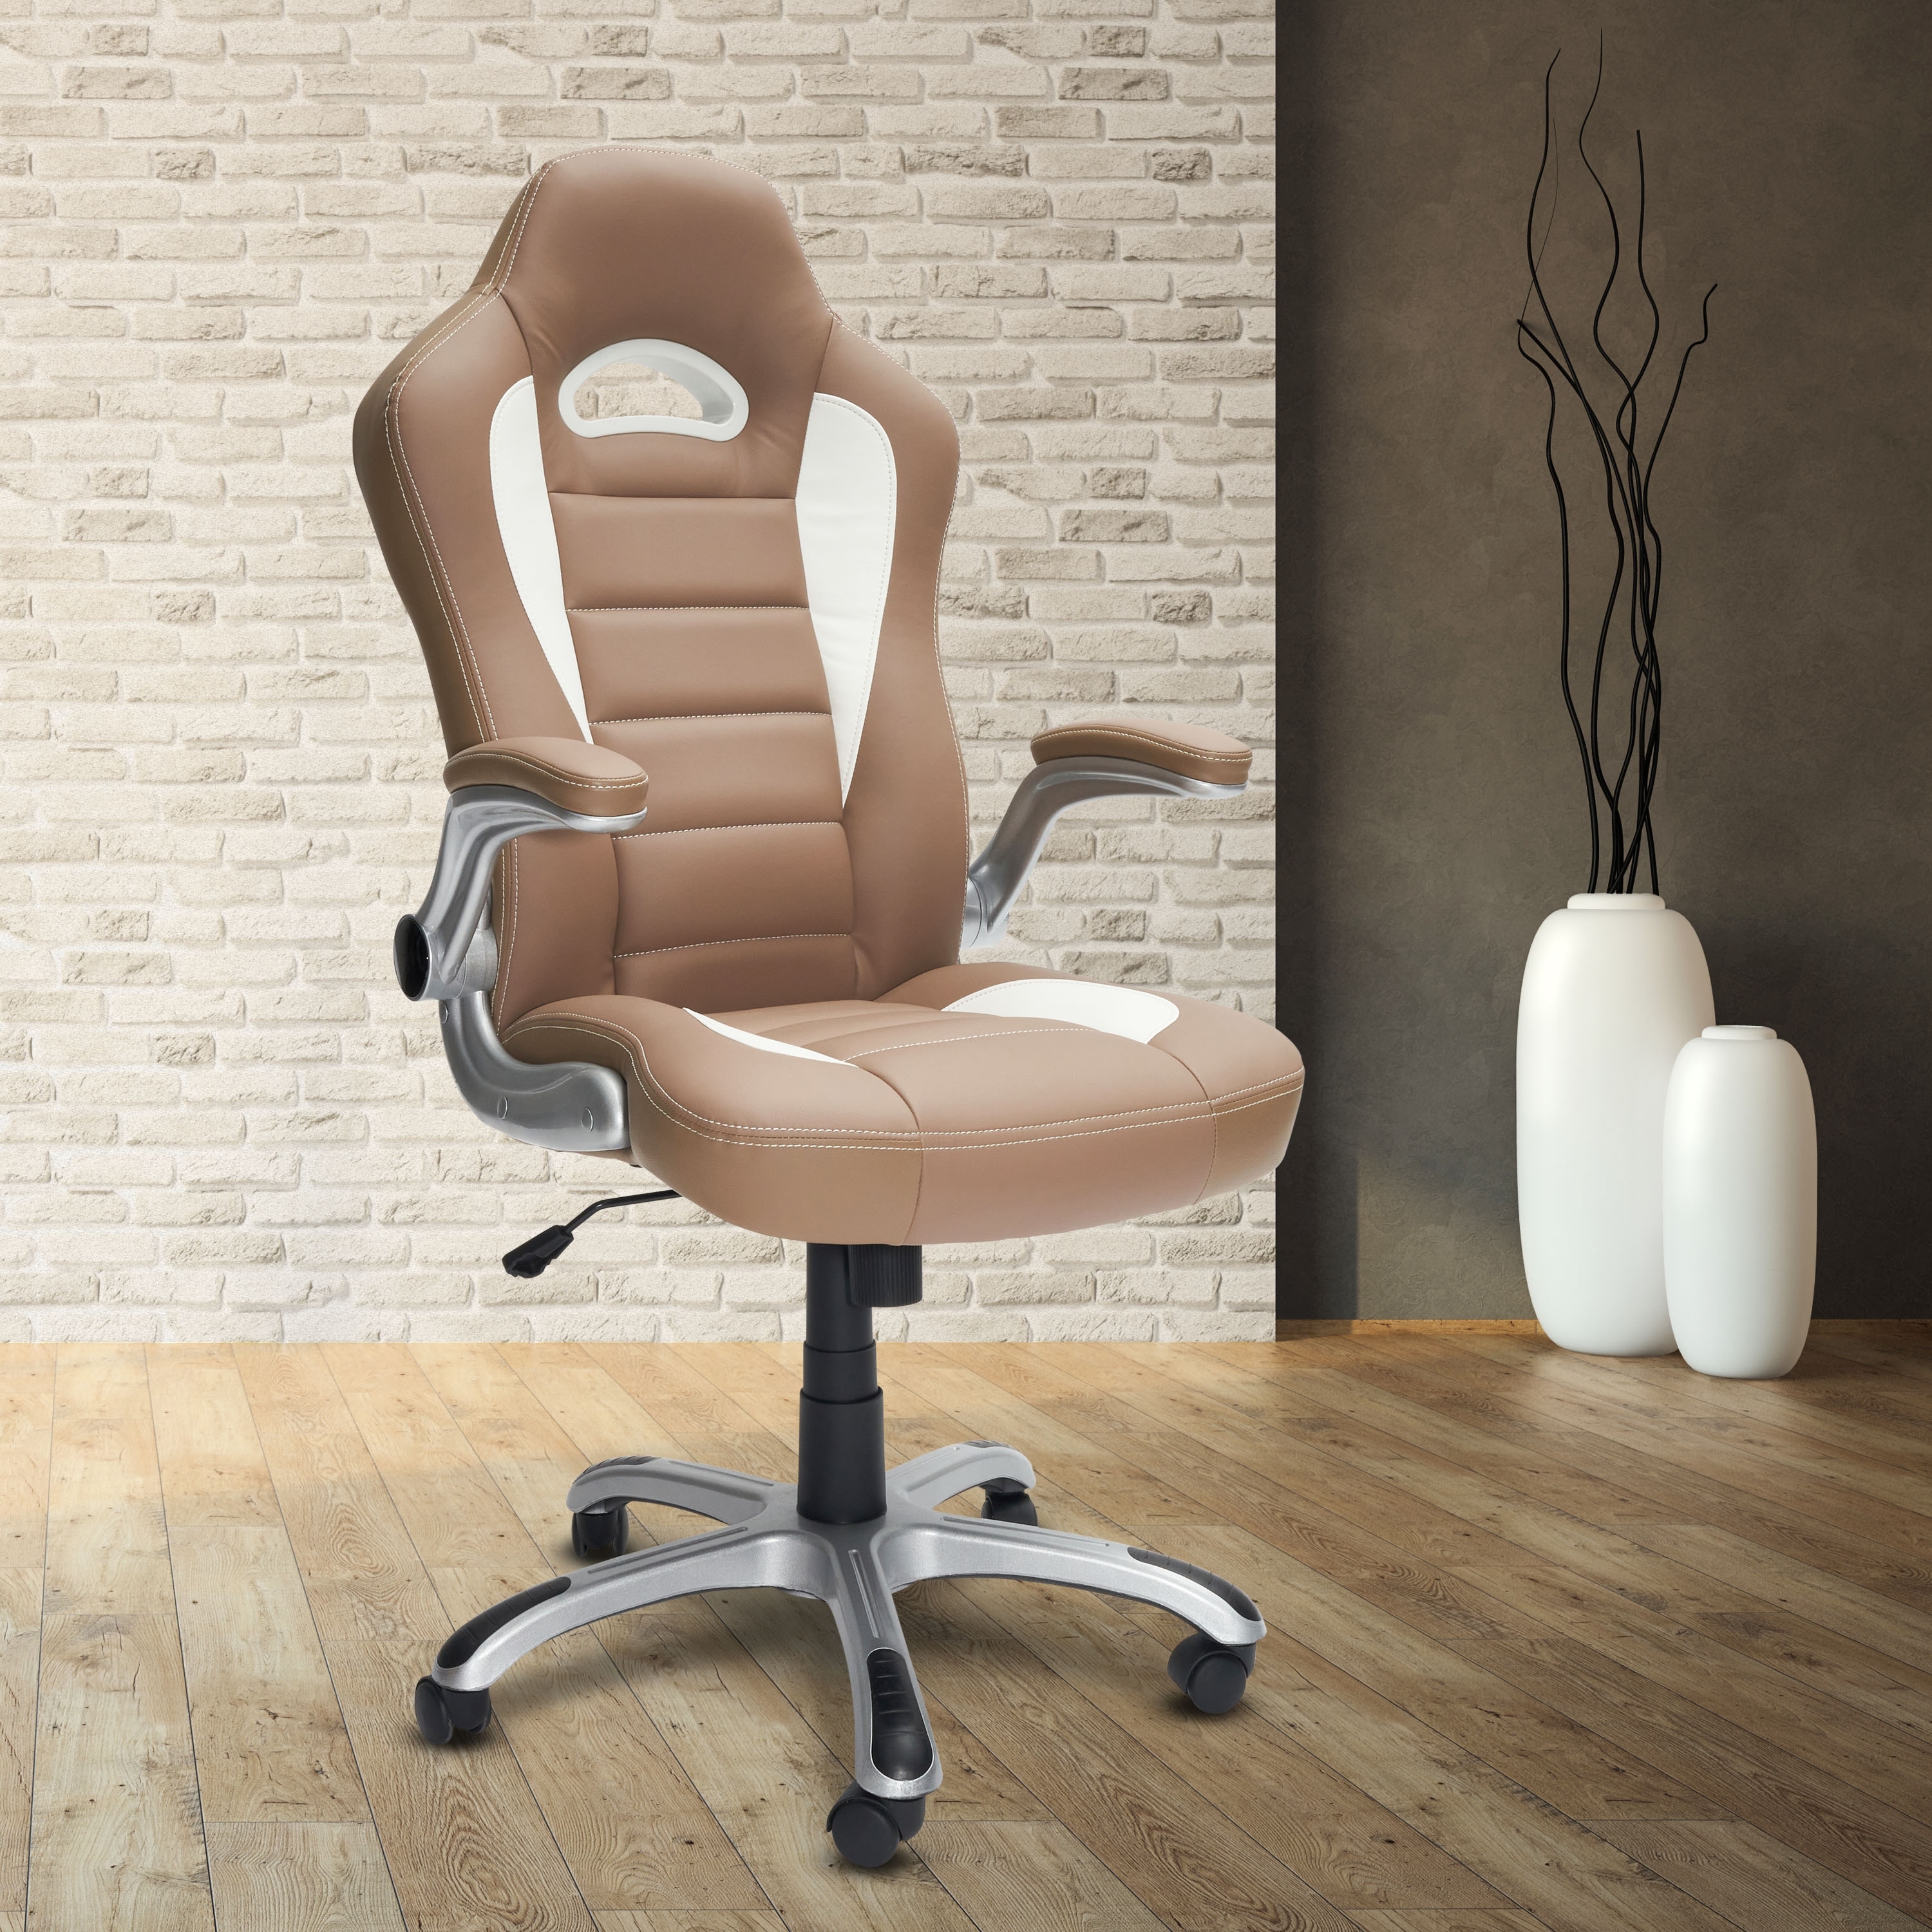 https://ak1.ostkcdn.com/images/products/is/images/direct/2f167097892d1413219f8c6d7d3dcb07b41f4602/Executive-Sport-Race-Office-Chair-with-Flip-Up-Arms.jpg